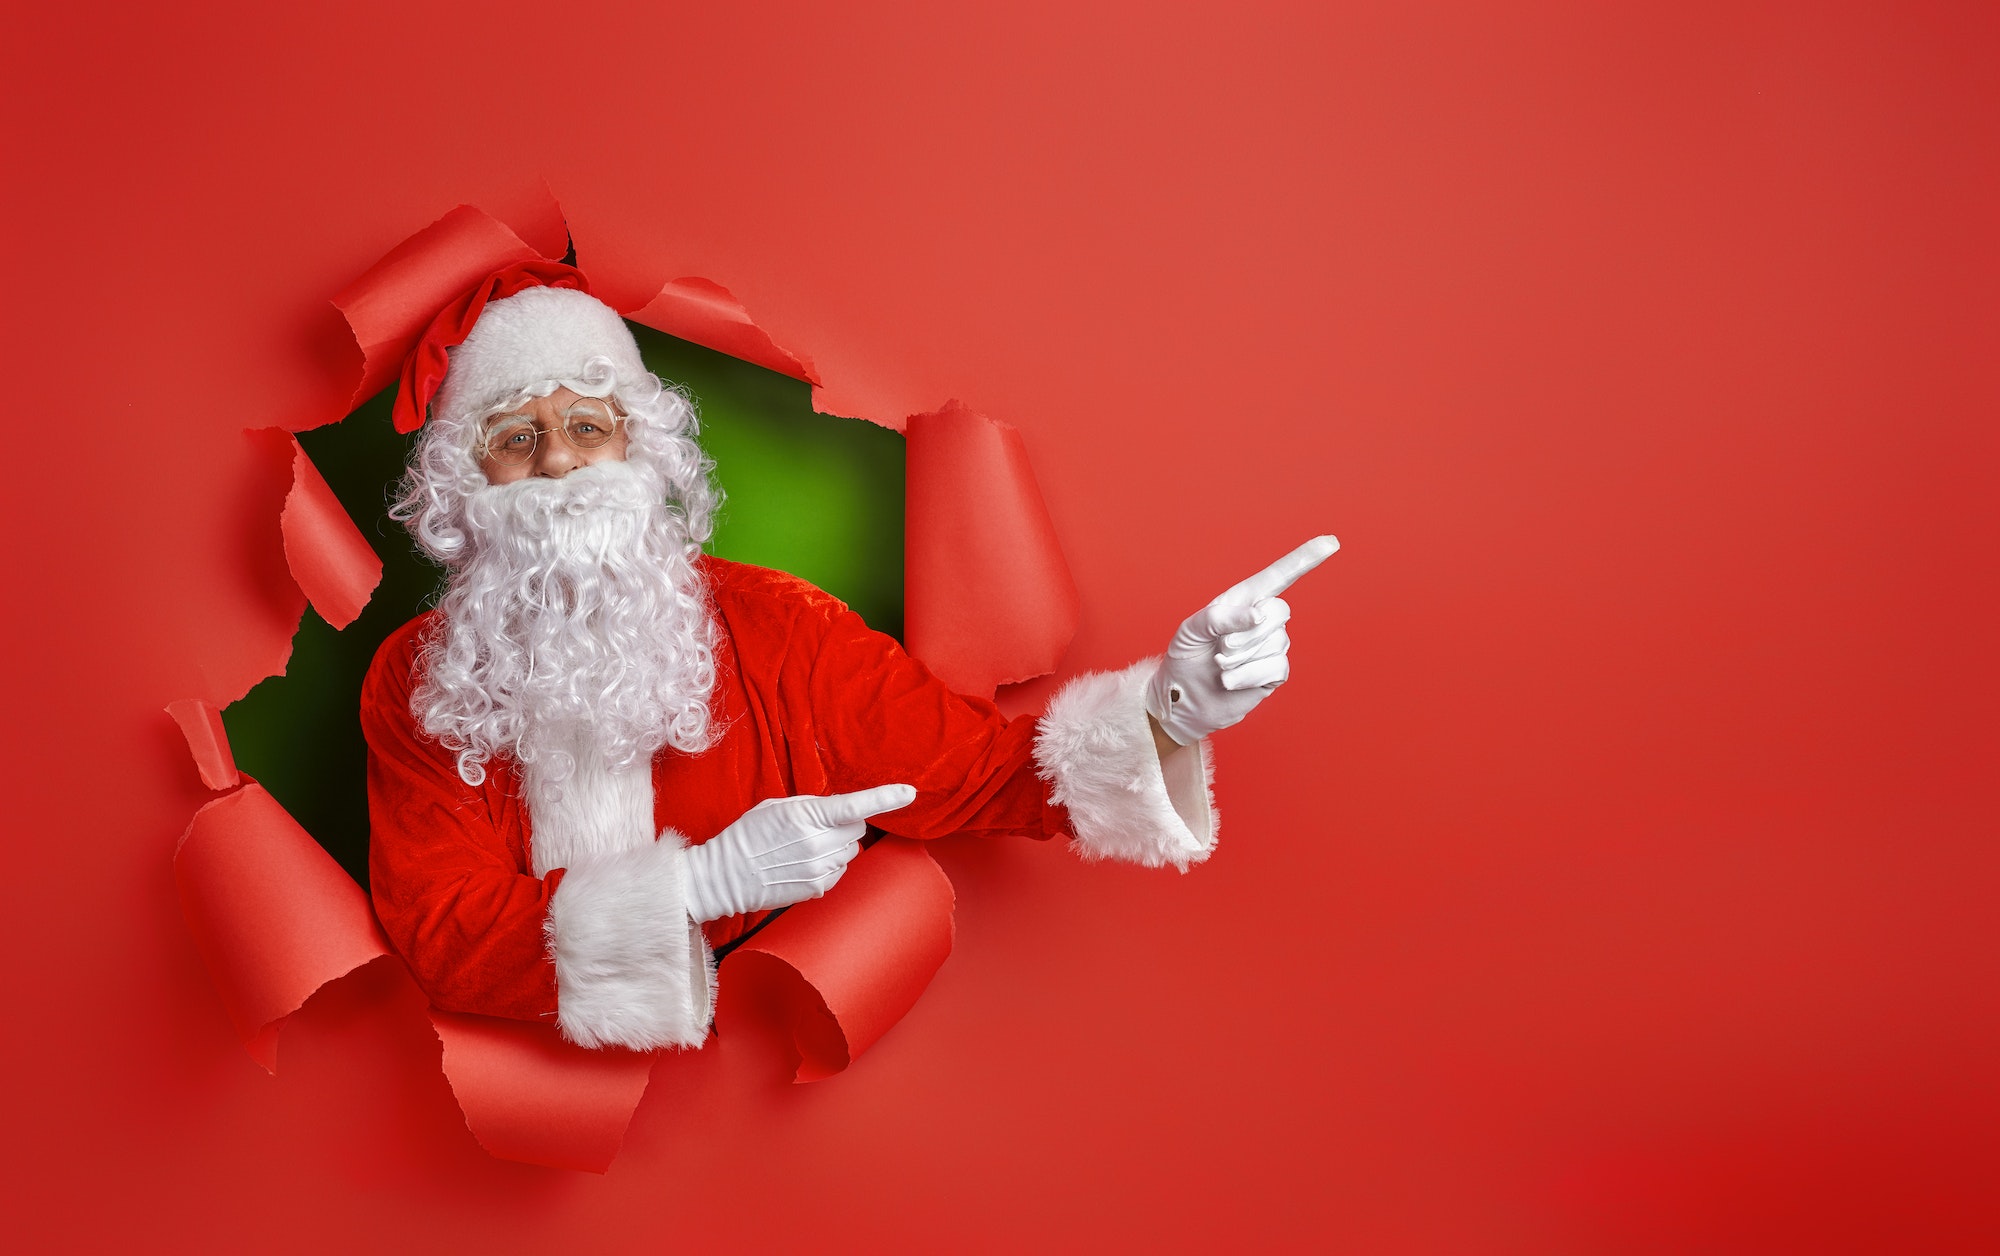 Santa Claus on color background.